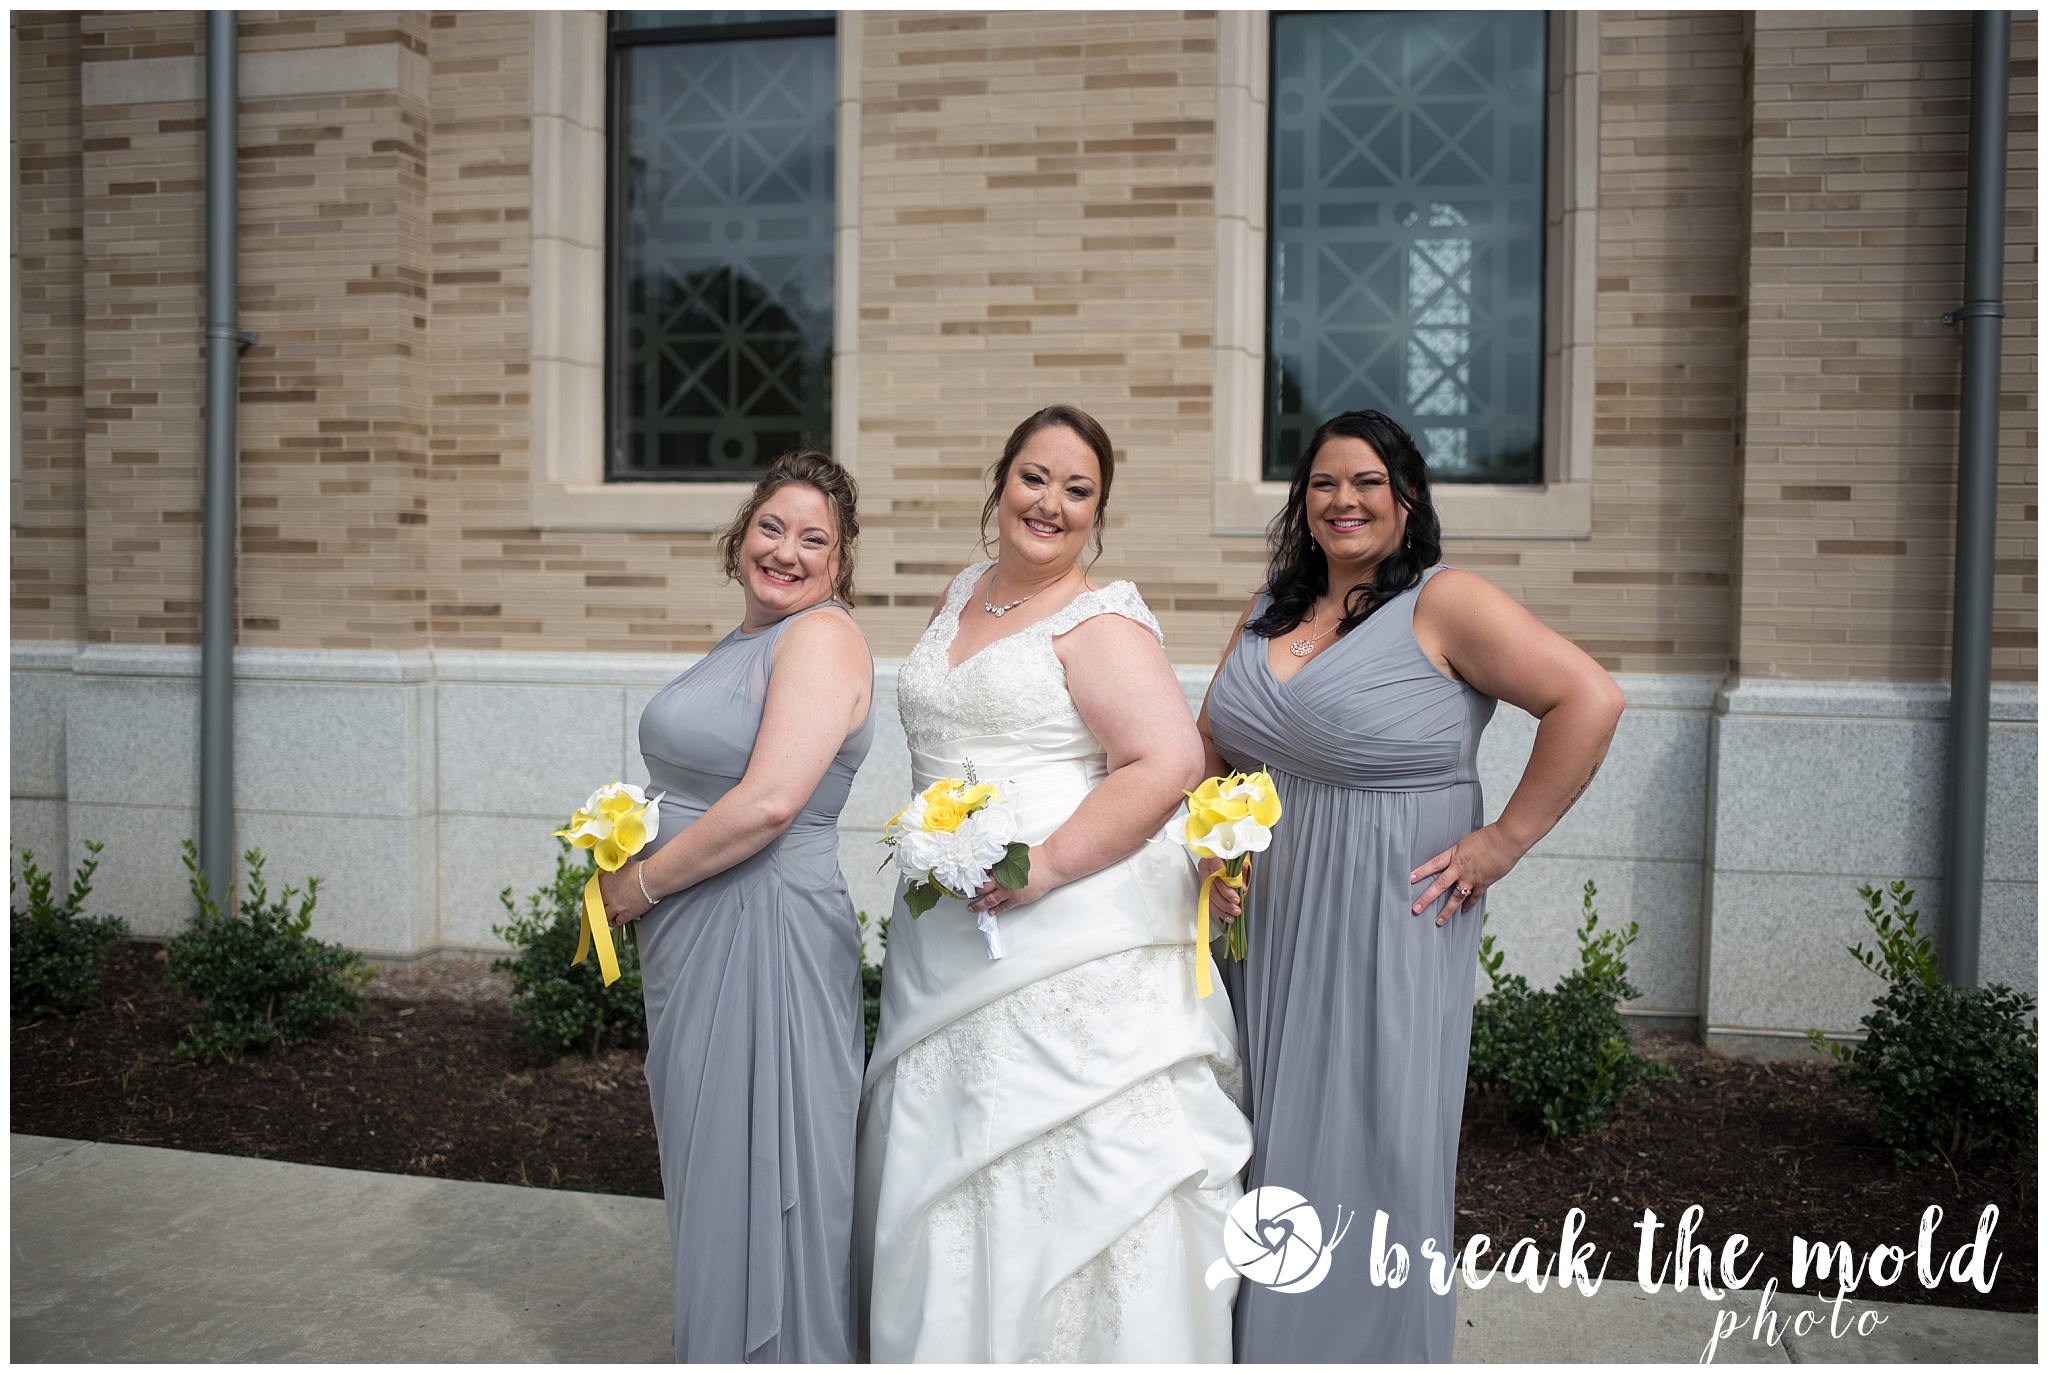 wedding-knoxville-sacred-heart-cathedral-photographer-break-the-mold-photo-feature-affordable_0772.jpg